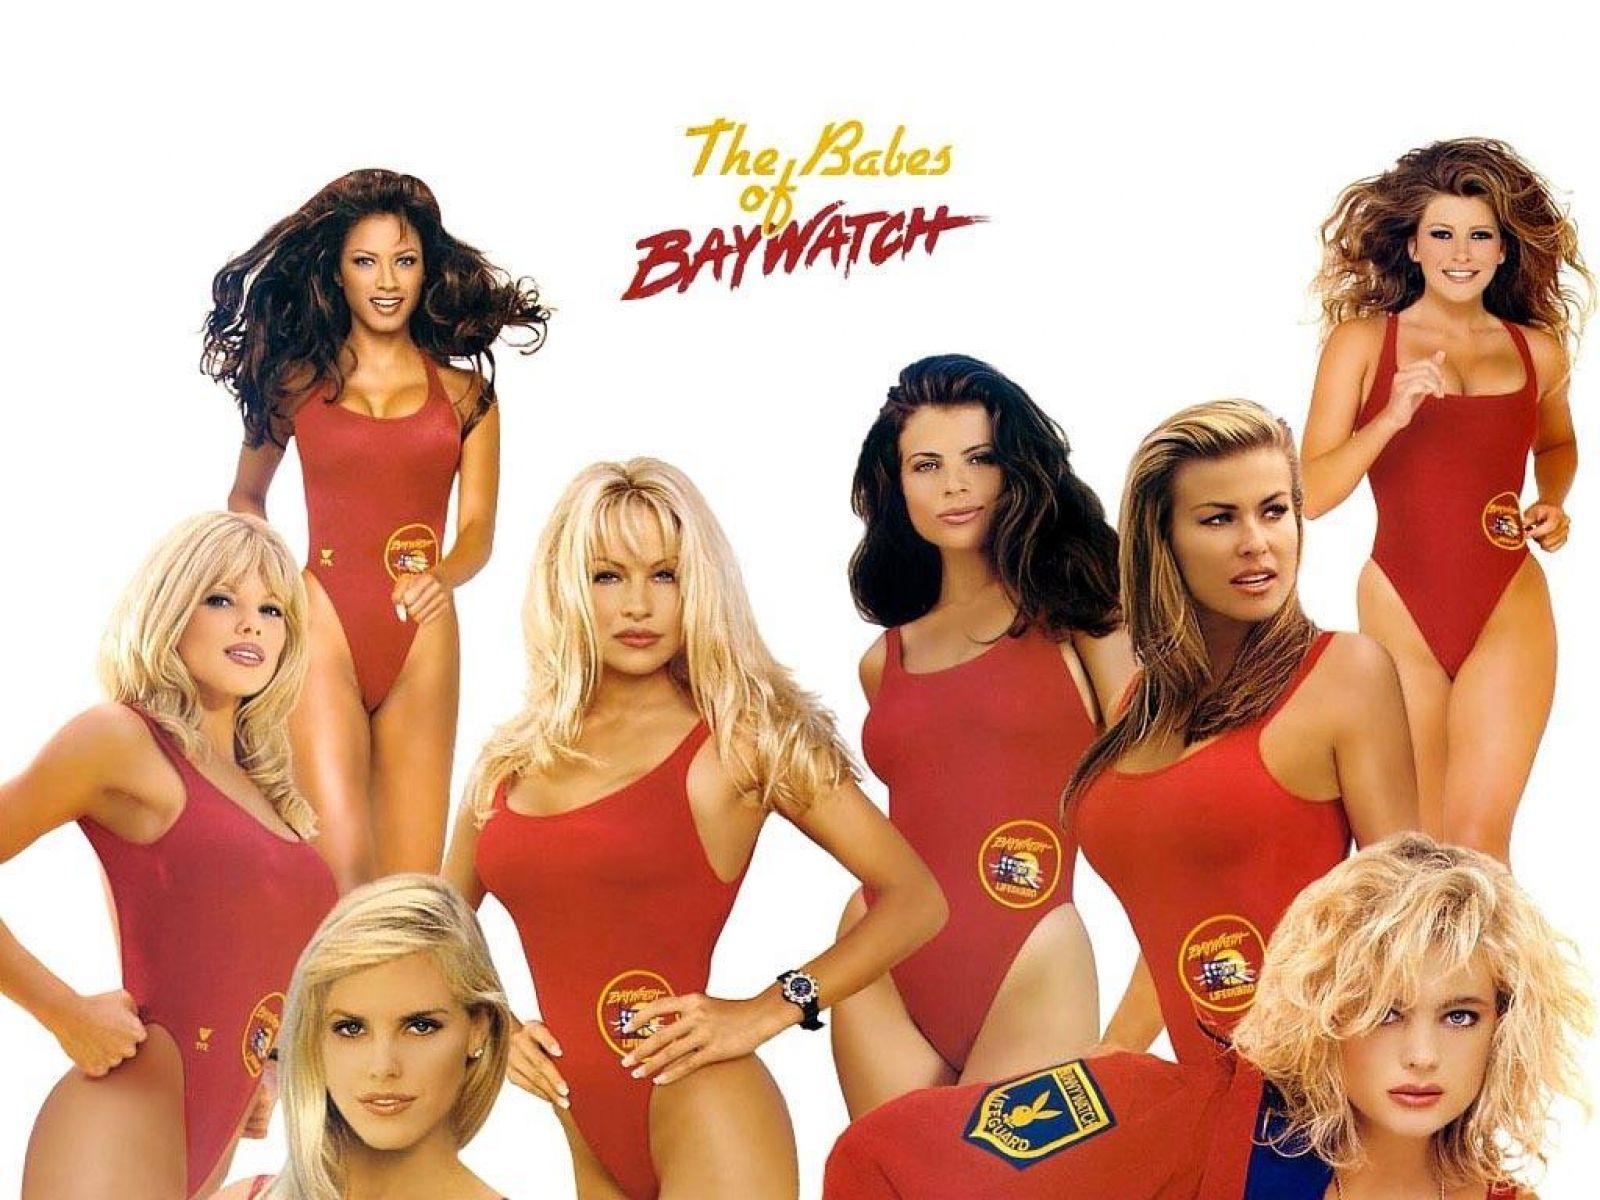 Babes of baywatch